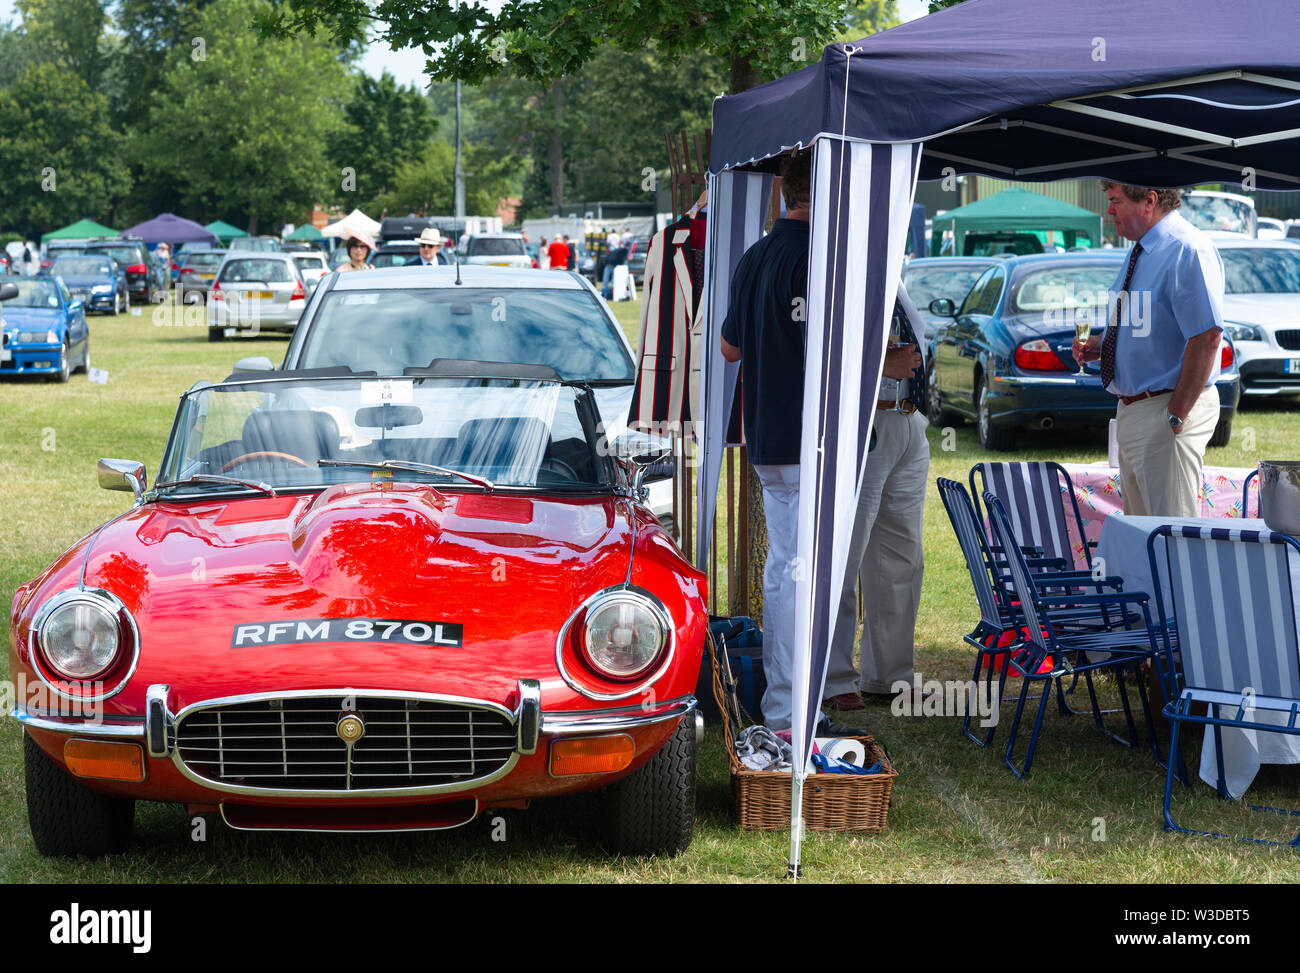 Jaguar E-Type parked with table ready for a buffet lunch at the Henley Royal Regatta 2019, Henley-on-Thames, Berkshire,England, UK Stock Photo